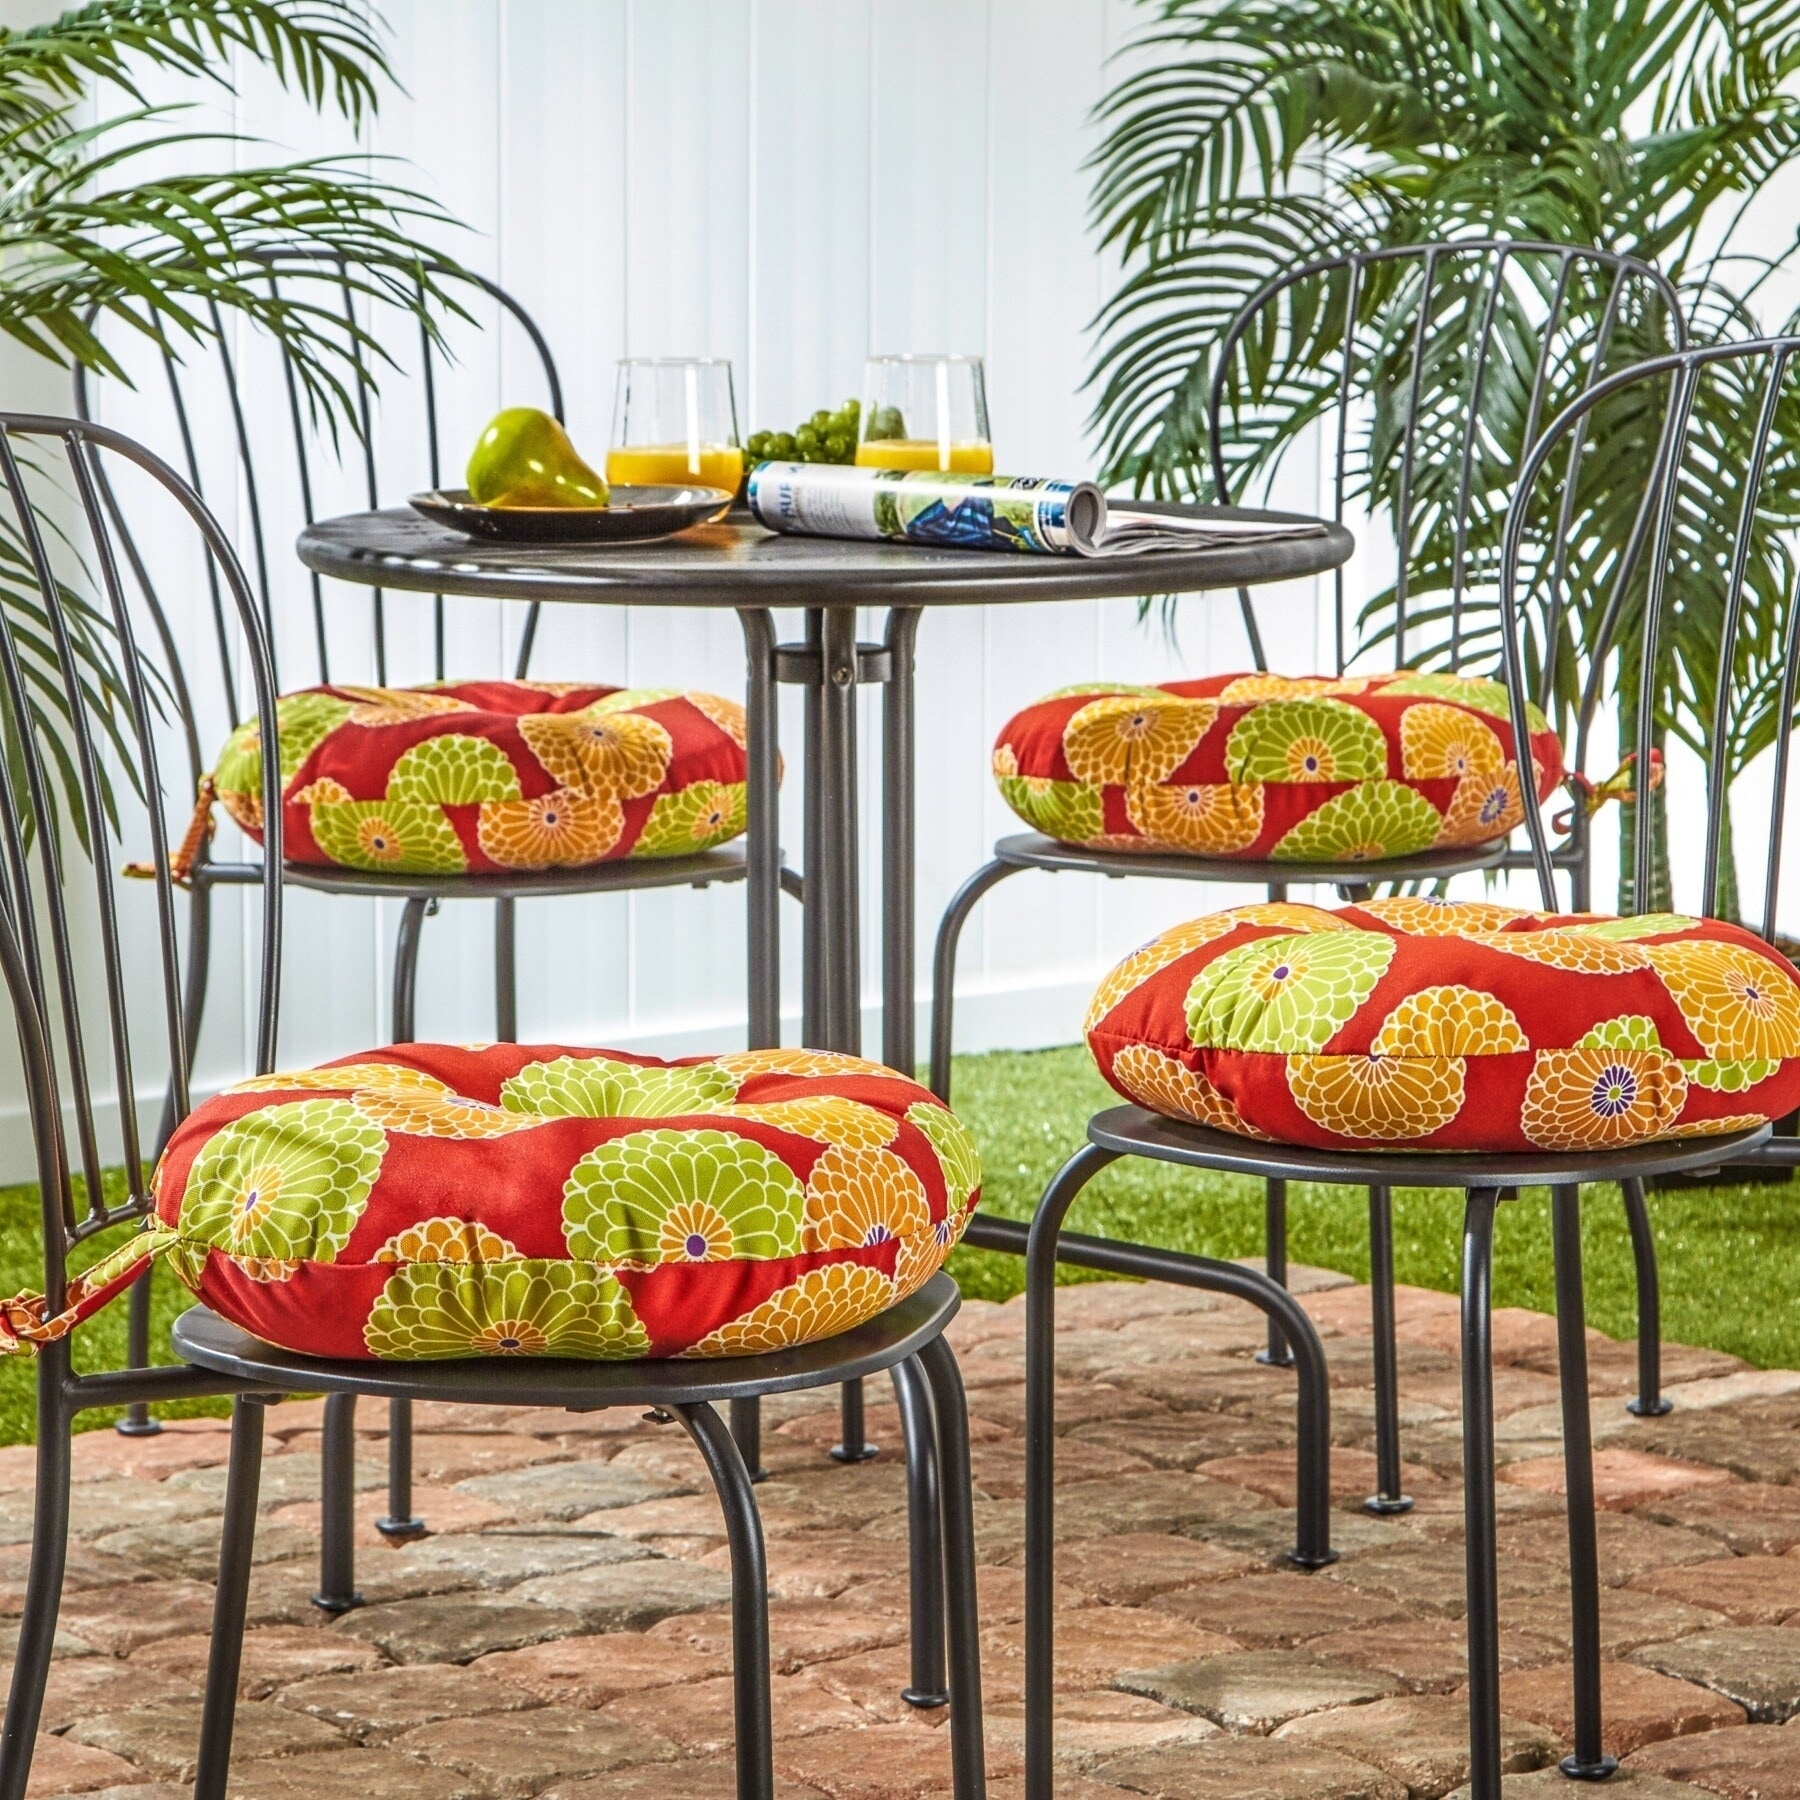 https://ak1.ostkcdn.com/images/products/22751134/Havenside-Home-Eastport-15-inch-Round-Outdoor-Bistro-Chair-Cushion-Set-of-4-15-inch-27223f0b-5b53-4e40-b413-be902745e4b4.jpg